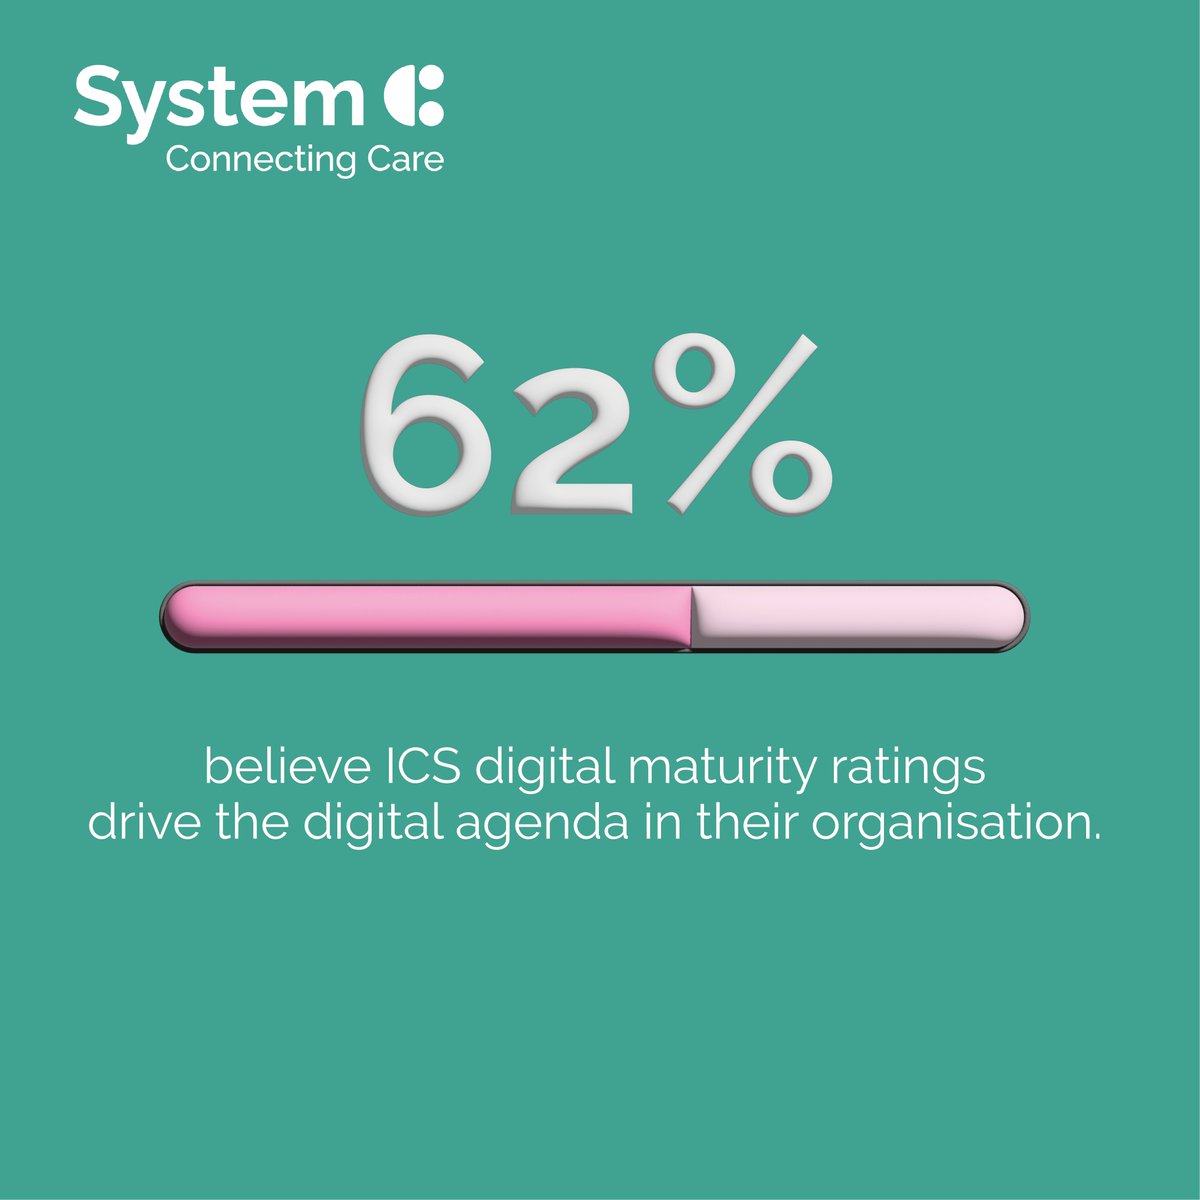 From our digital maturity survey, which helped to inform our new Digital Maturity whitepaper: 62% of respondents believe ICS maturity ratings drive their organisations' digital agendas. Download our new whitepaper here ⬇️ bit.ly/49OLhzr #NHS #DigitalMaturity #ICS